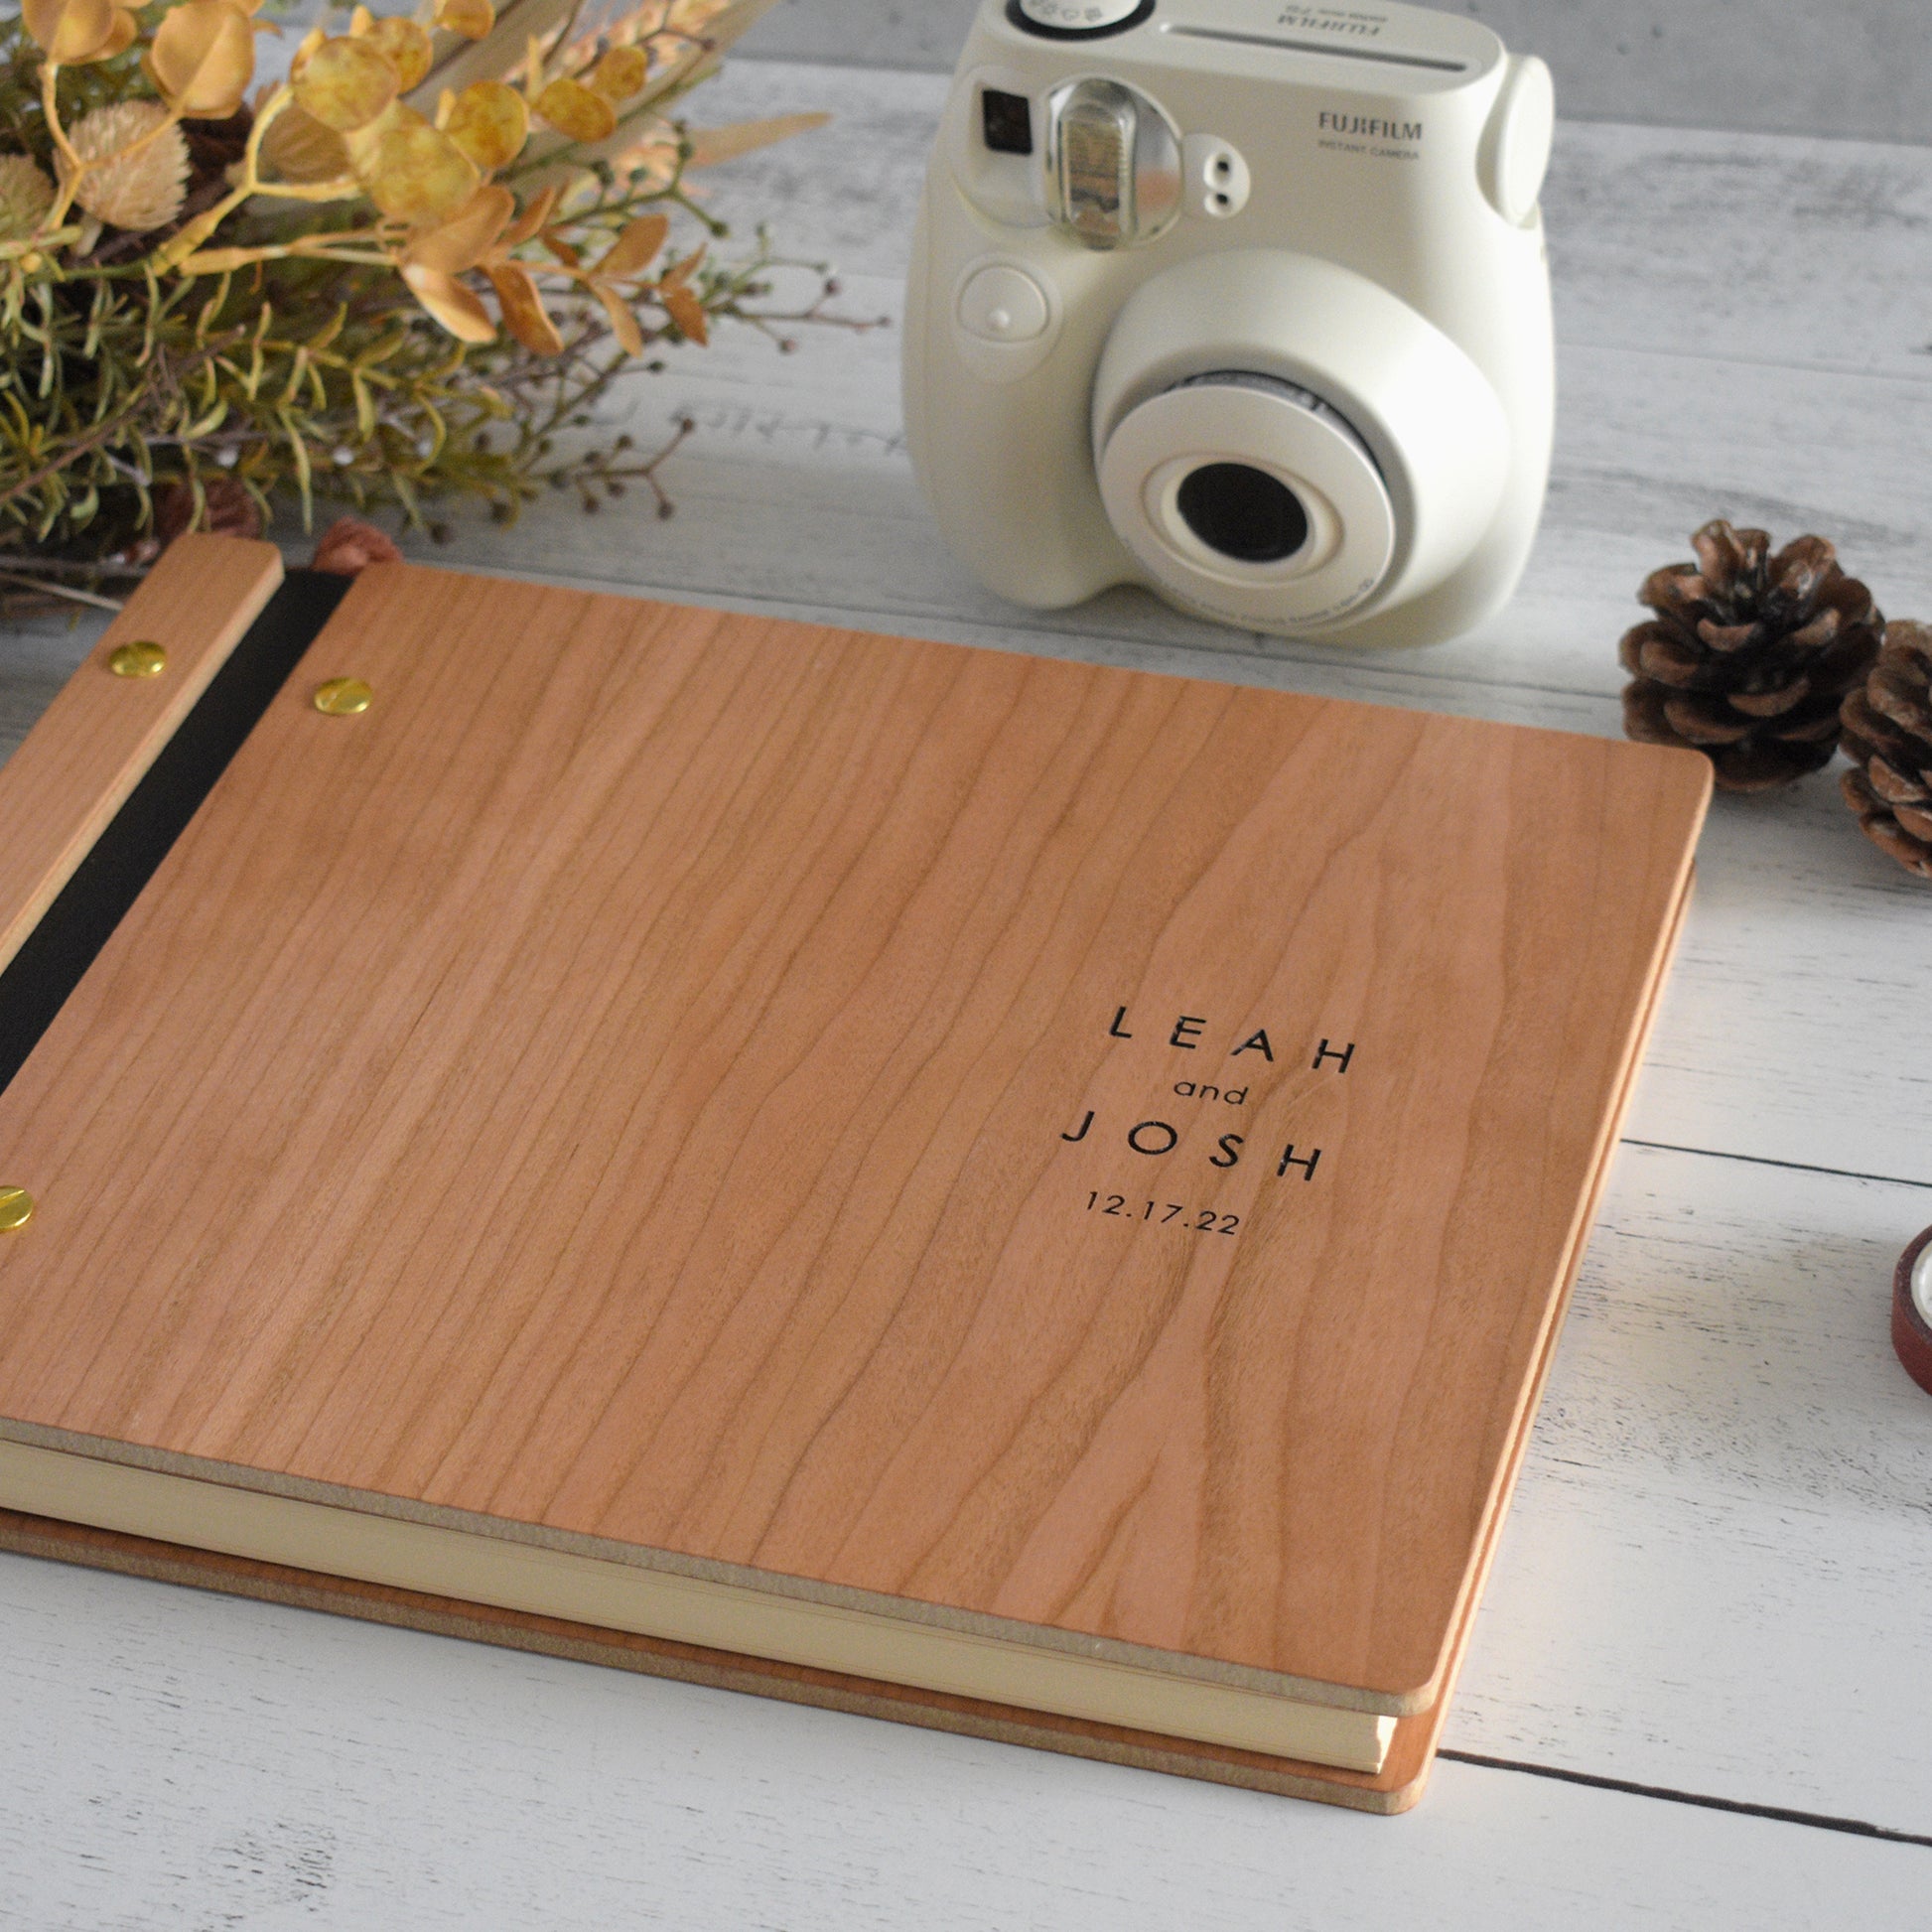 An 8.5x11" guest book lies on a table. Made of cherry wood, black vegan leather binding, and gold hardware. The front cover reads "Leah and Josh, 12.17.22."